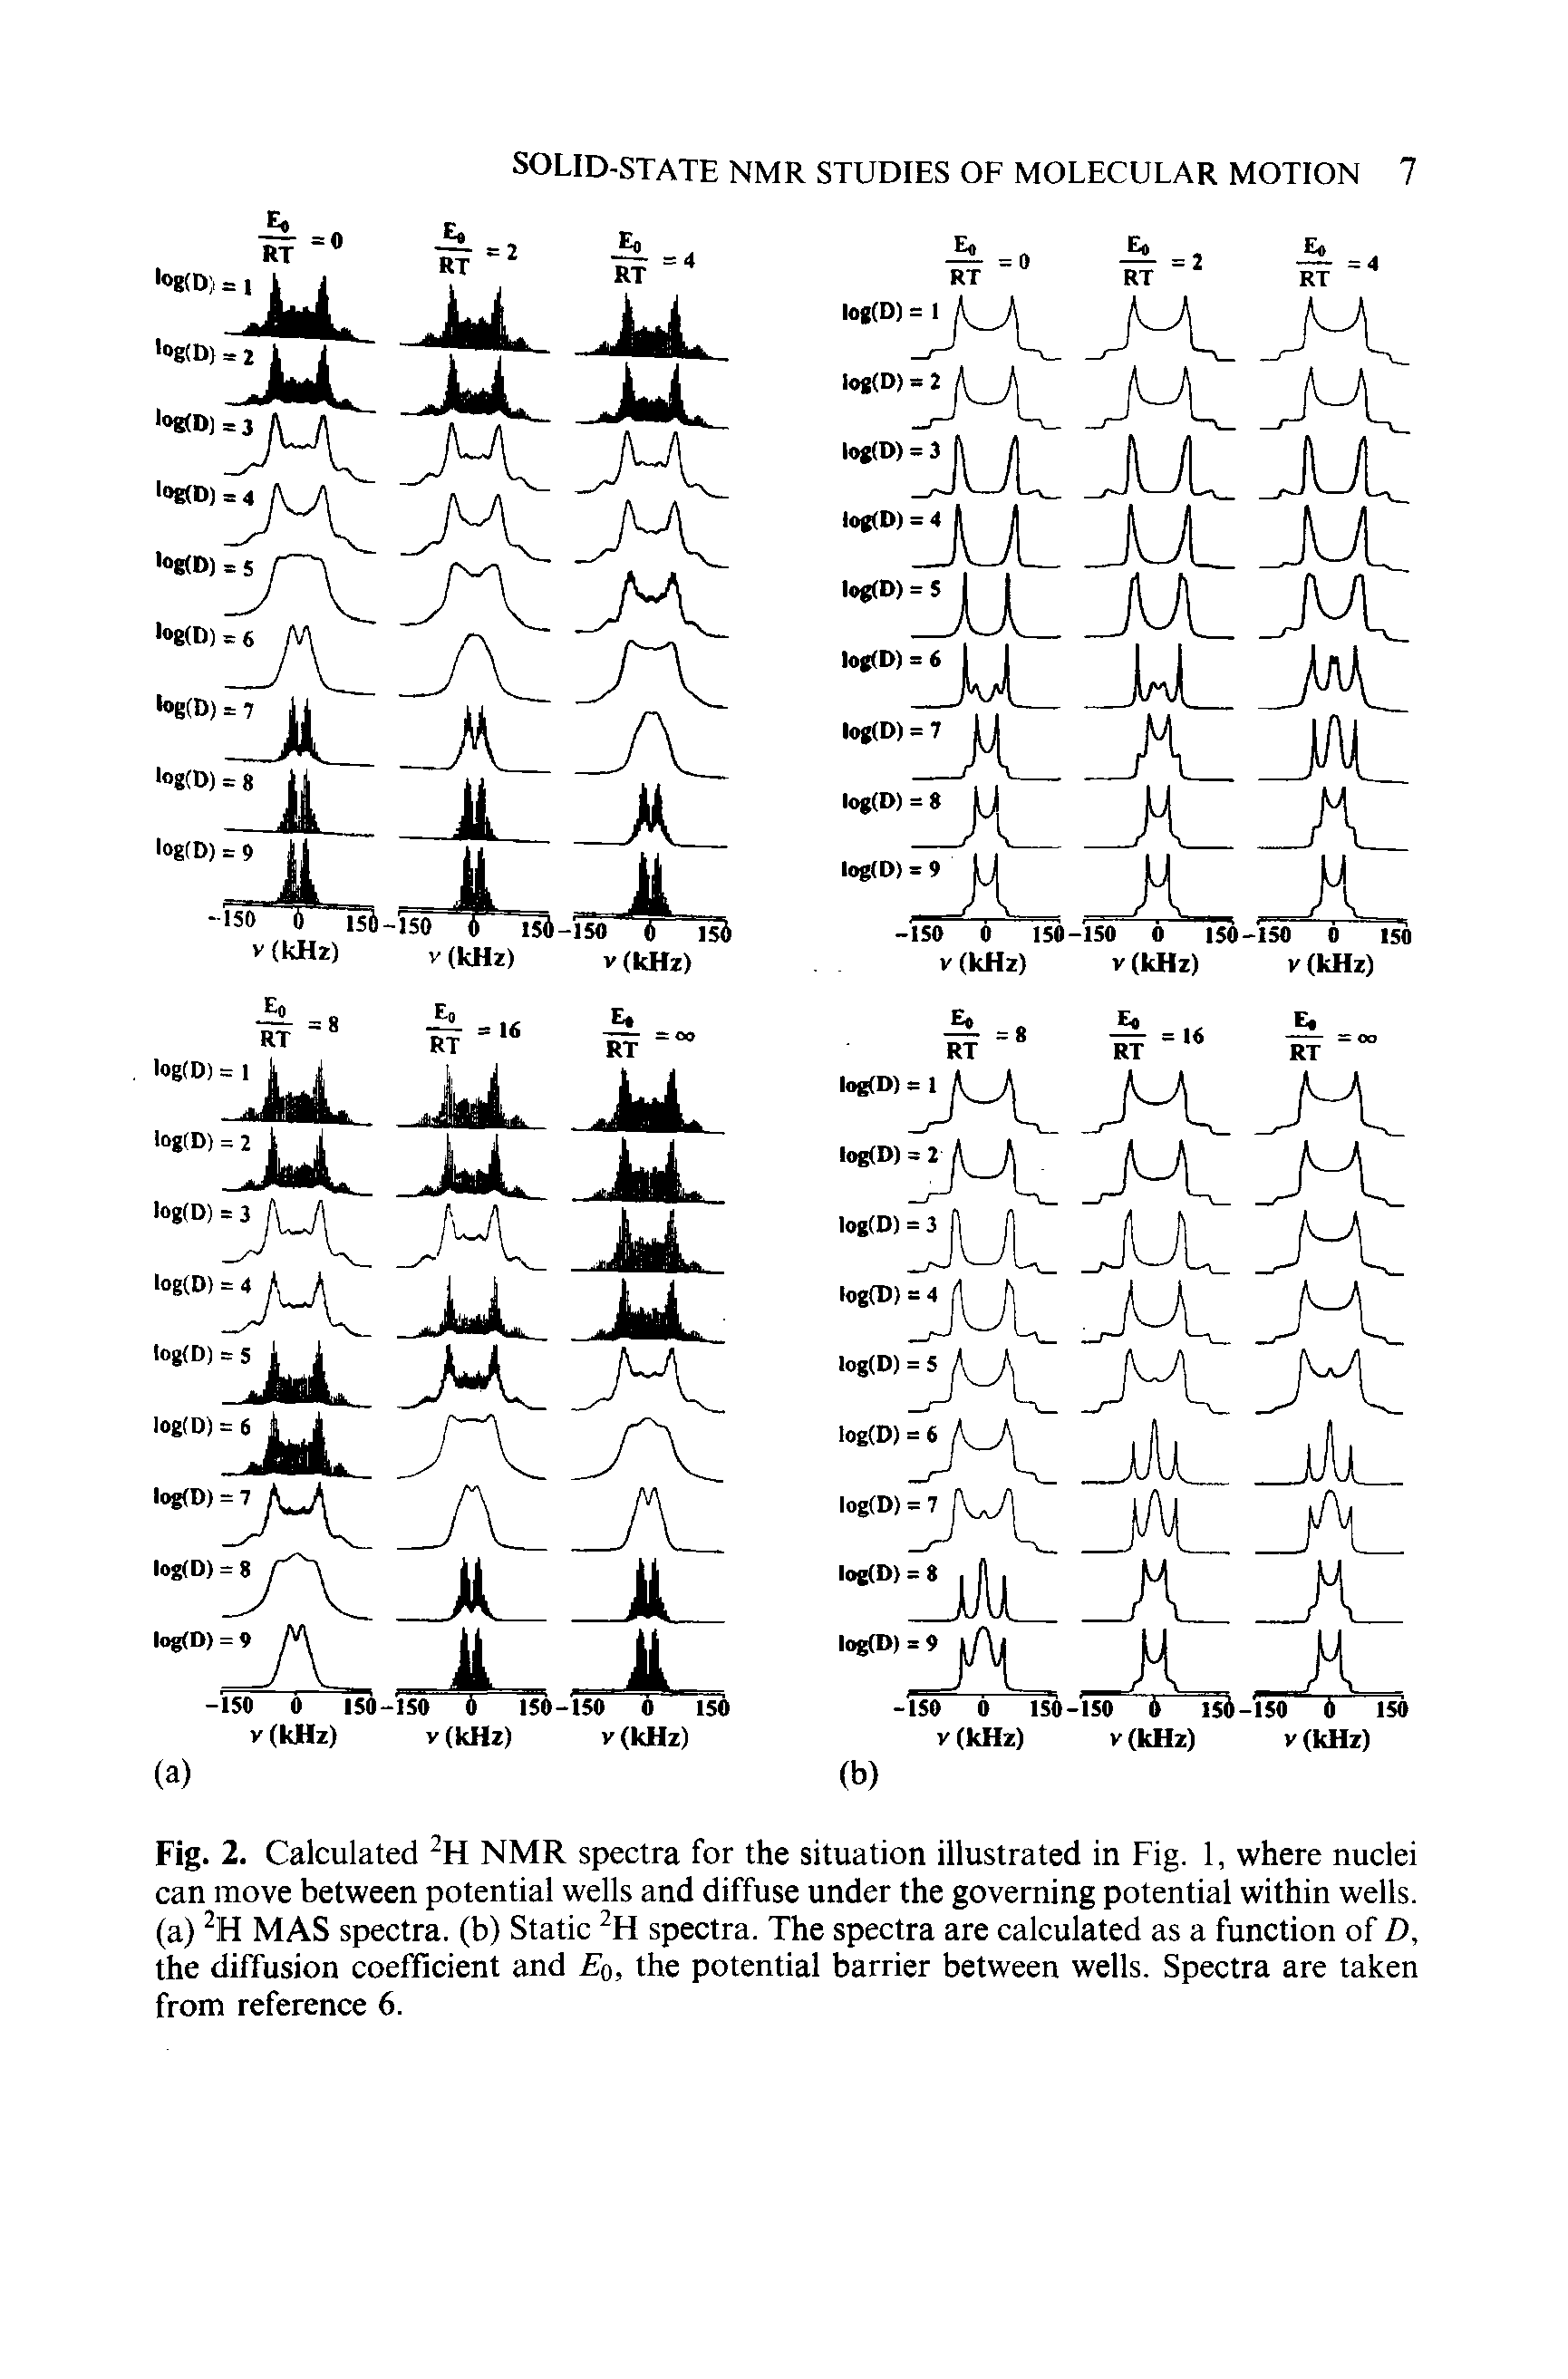 Fig. 2. Calculated 2H NMR spectra for the situation illustrated in Fig. 1, where nuclei can move between potential wells and diffuse under the governing potential within wells, (a) 2H MAS spectra, (b) Static 2H spectra. The spectra are calculated as a function of D, the diffusion coefficient and Efi, the potential barrier between wells. Spectra are taken from reference 6.